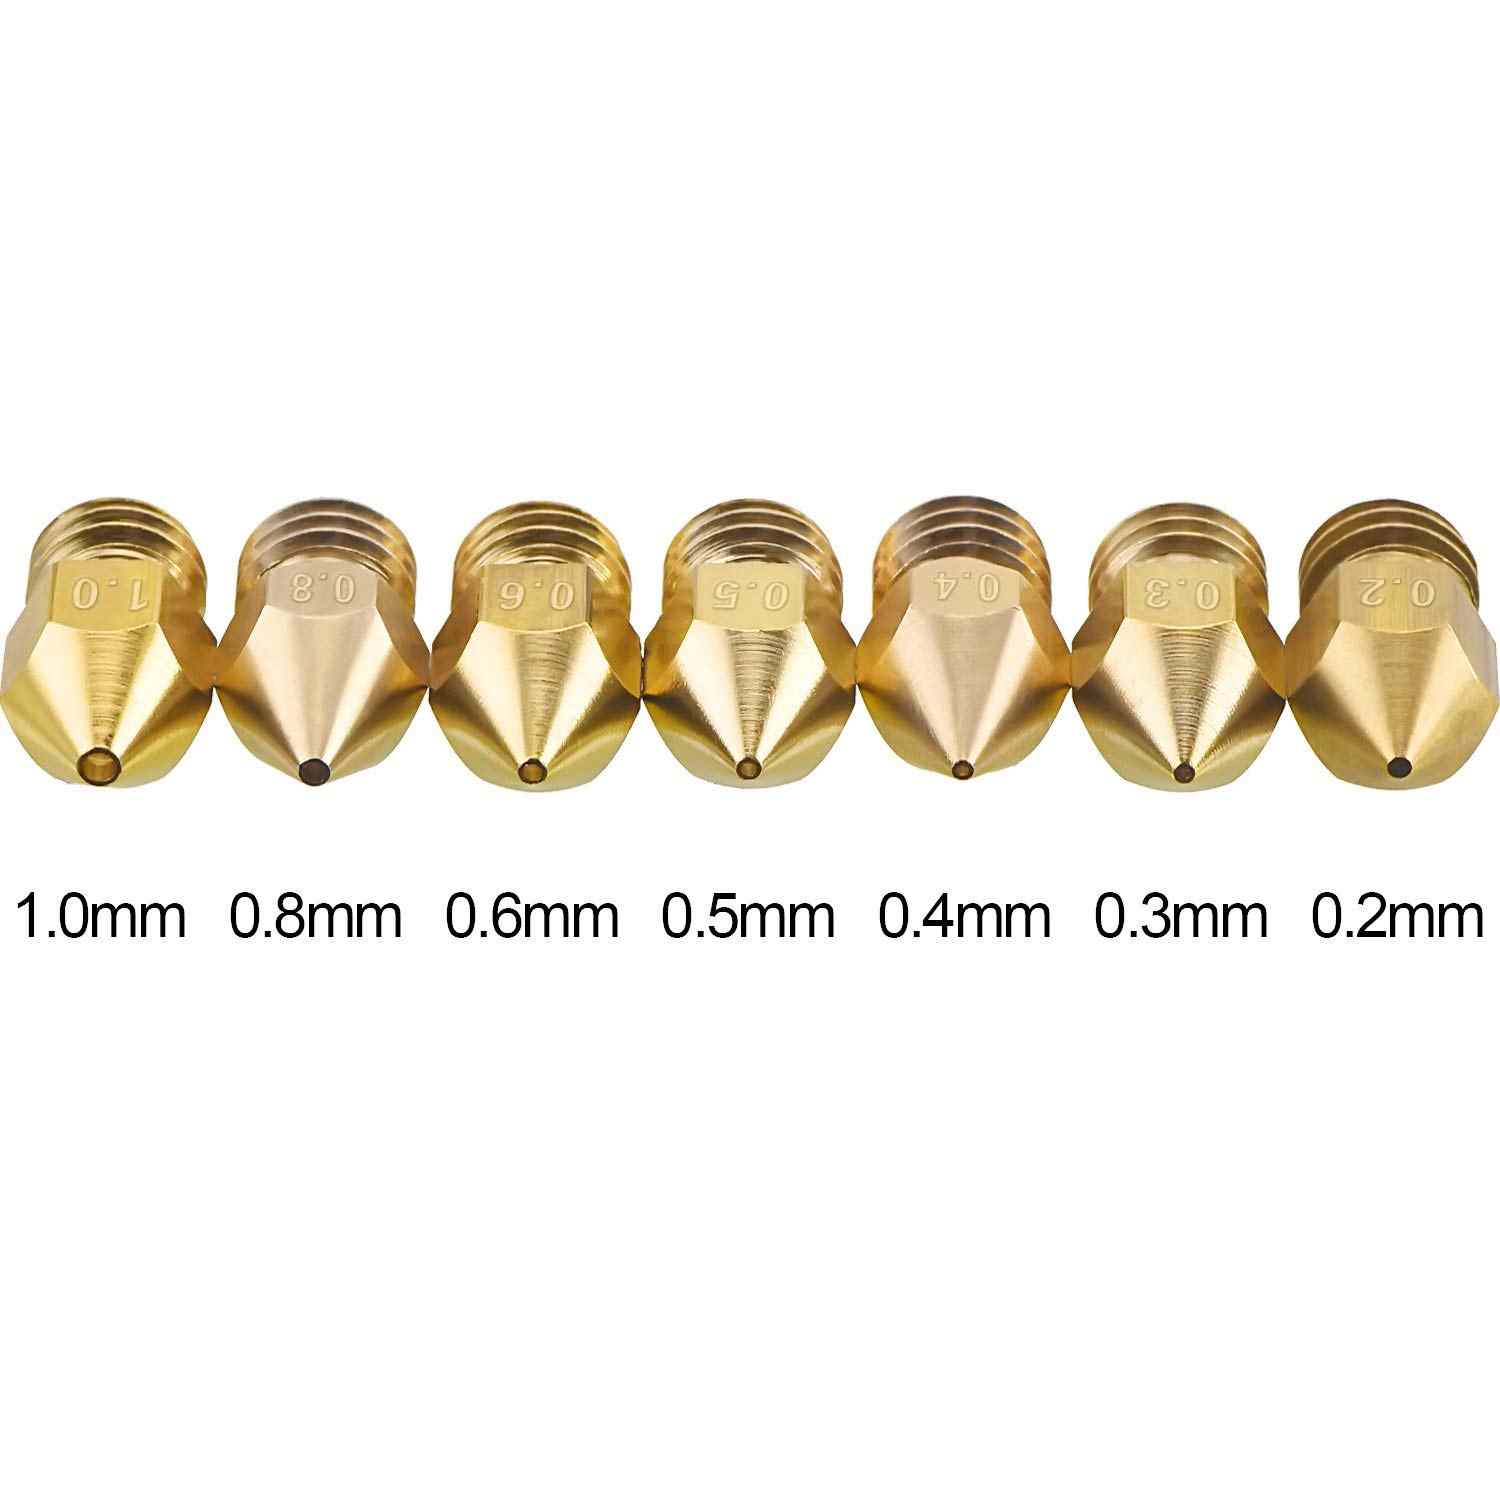 3D Printer Nozzles MK8 Extruder Head for Creality CR-10 0.2mm, 0.3mm, 0.4mm, 0.5mm, 0.6mm, 0.8mm, 1.0mm